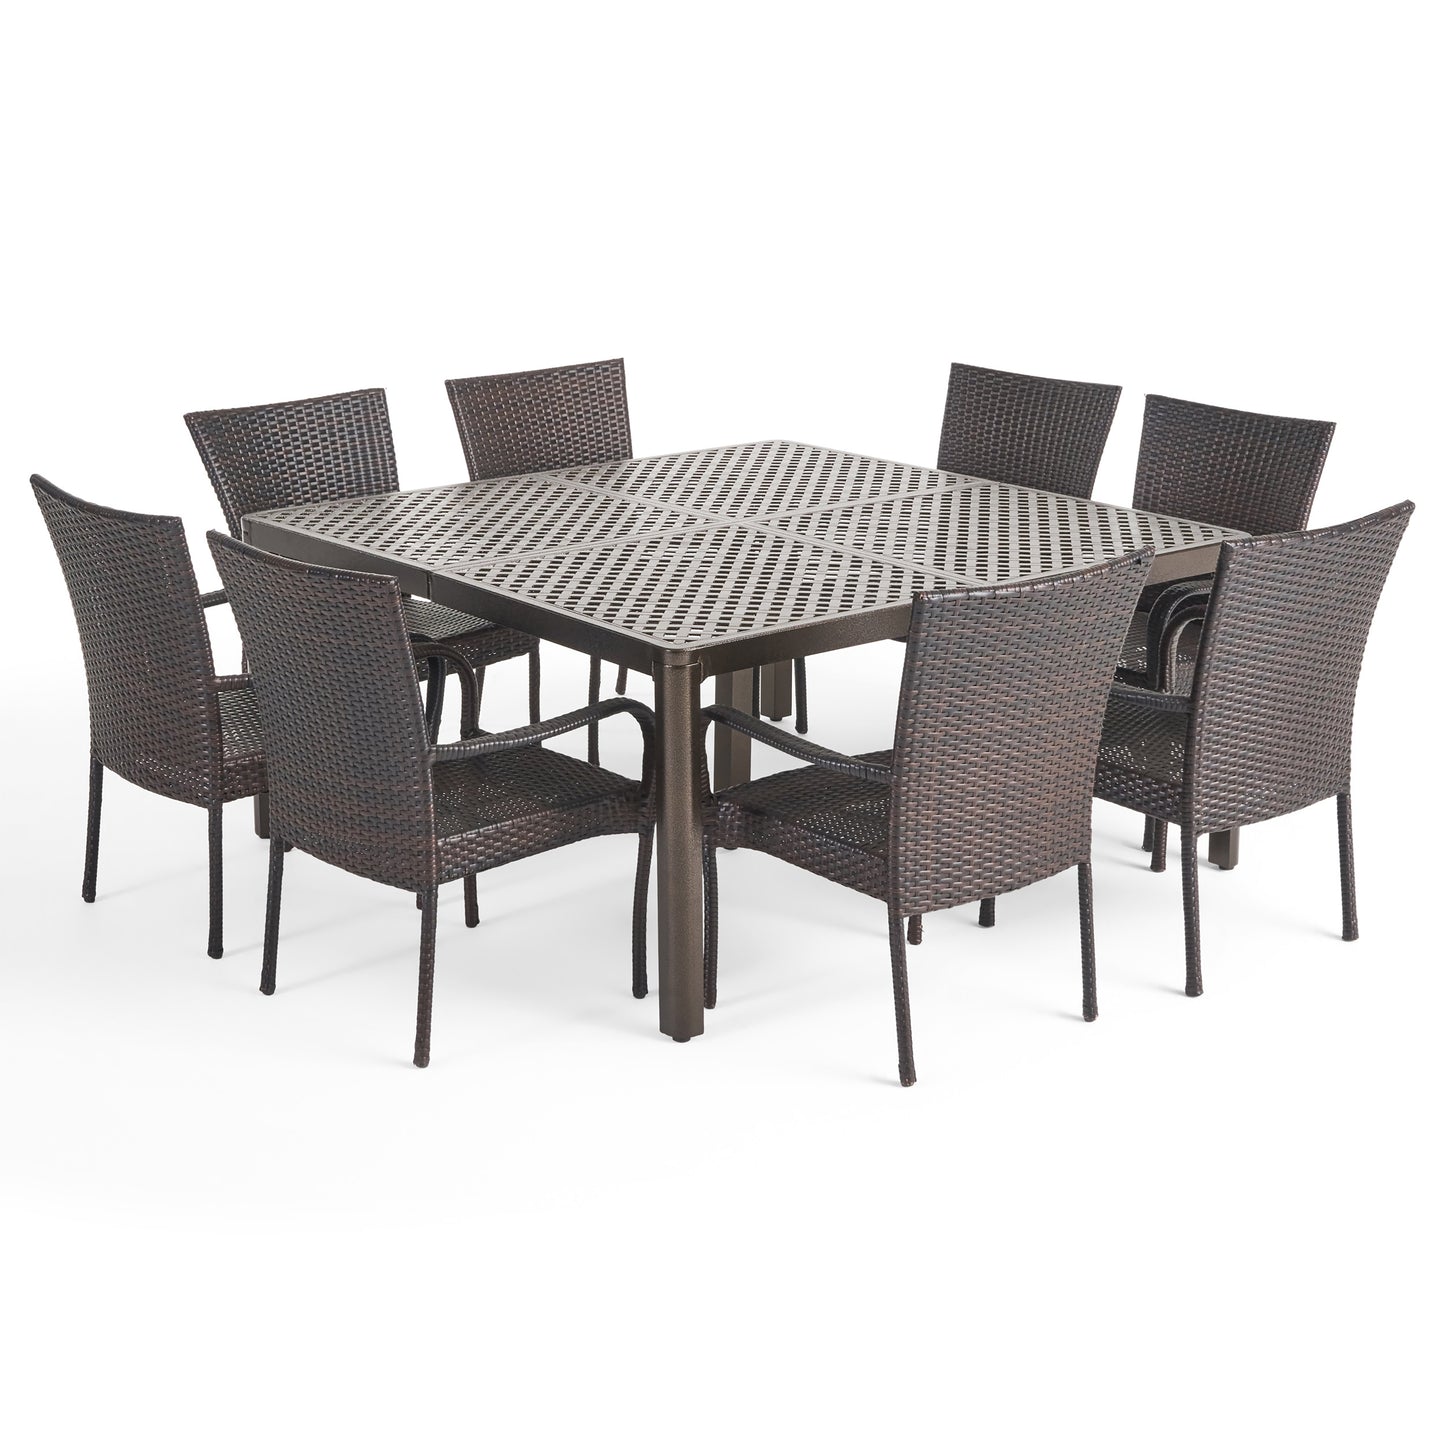 Lillian Outdoor Aluminum and Wicker 8 Seater Dining Set with Stacking Chairs